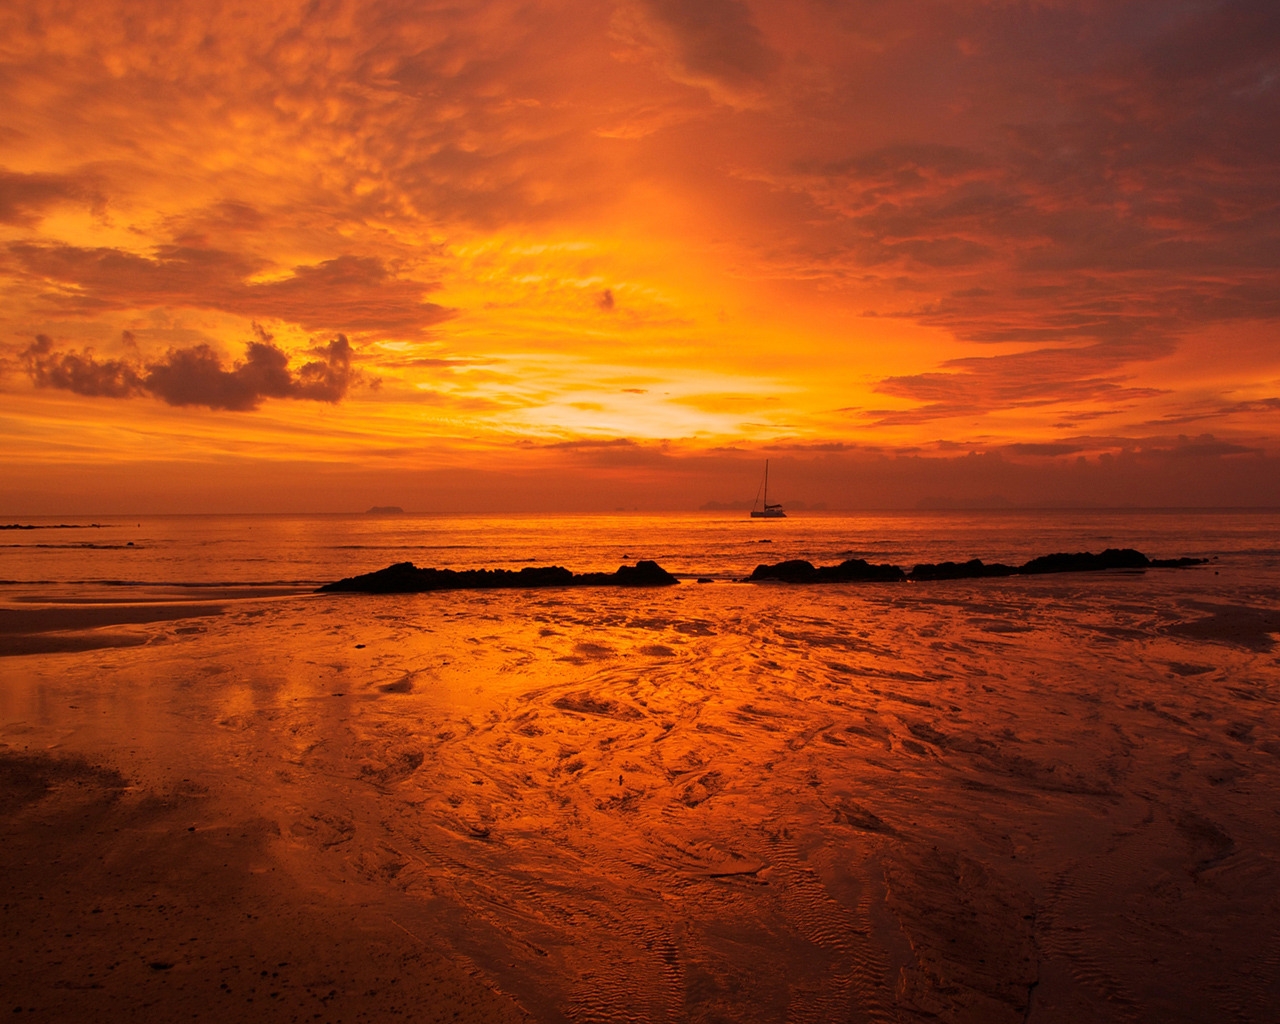 Burning Seascape for 1280 x 1024 resolution